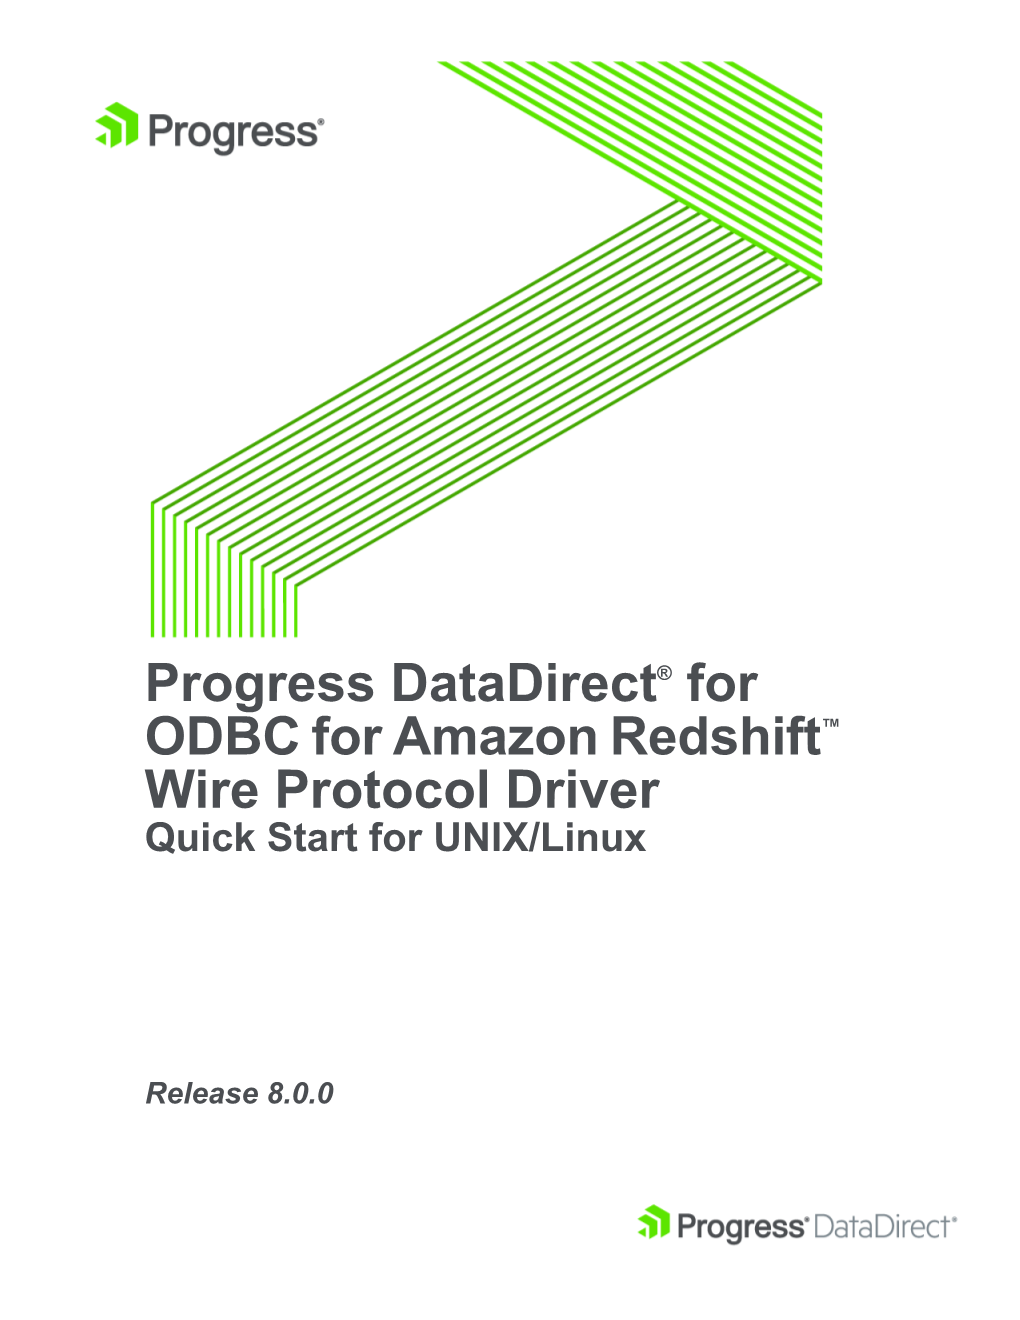 Progress Datadirect for ODBC for Amazon Redshift Wire Protocol Driver Quick Start for UNIX/Linux